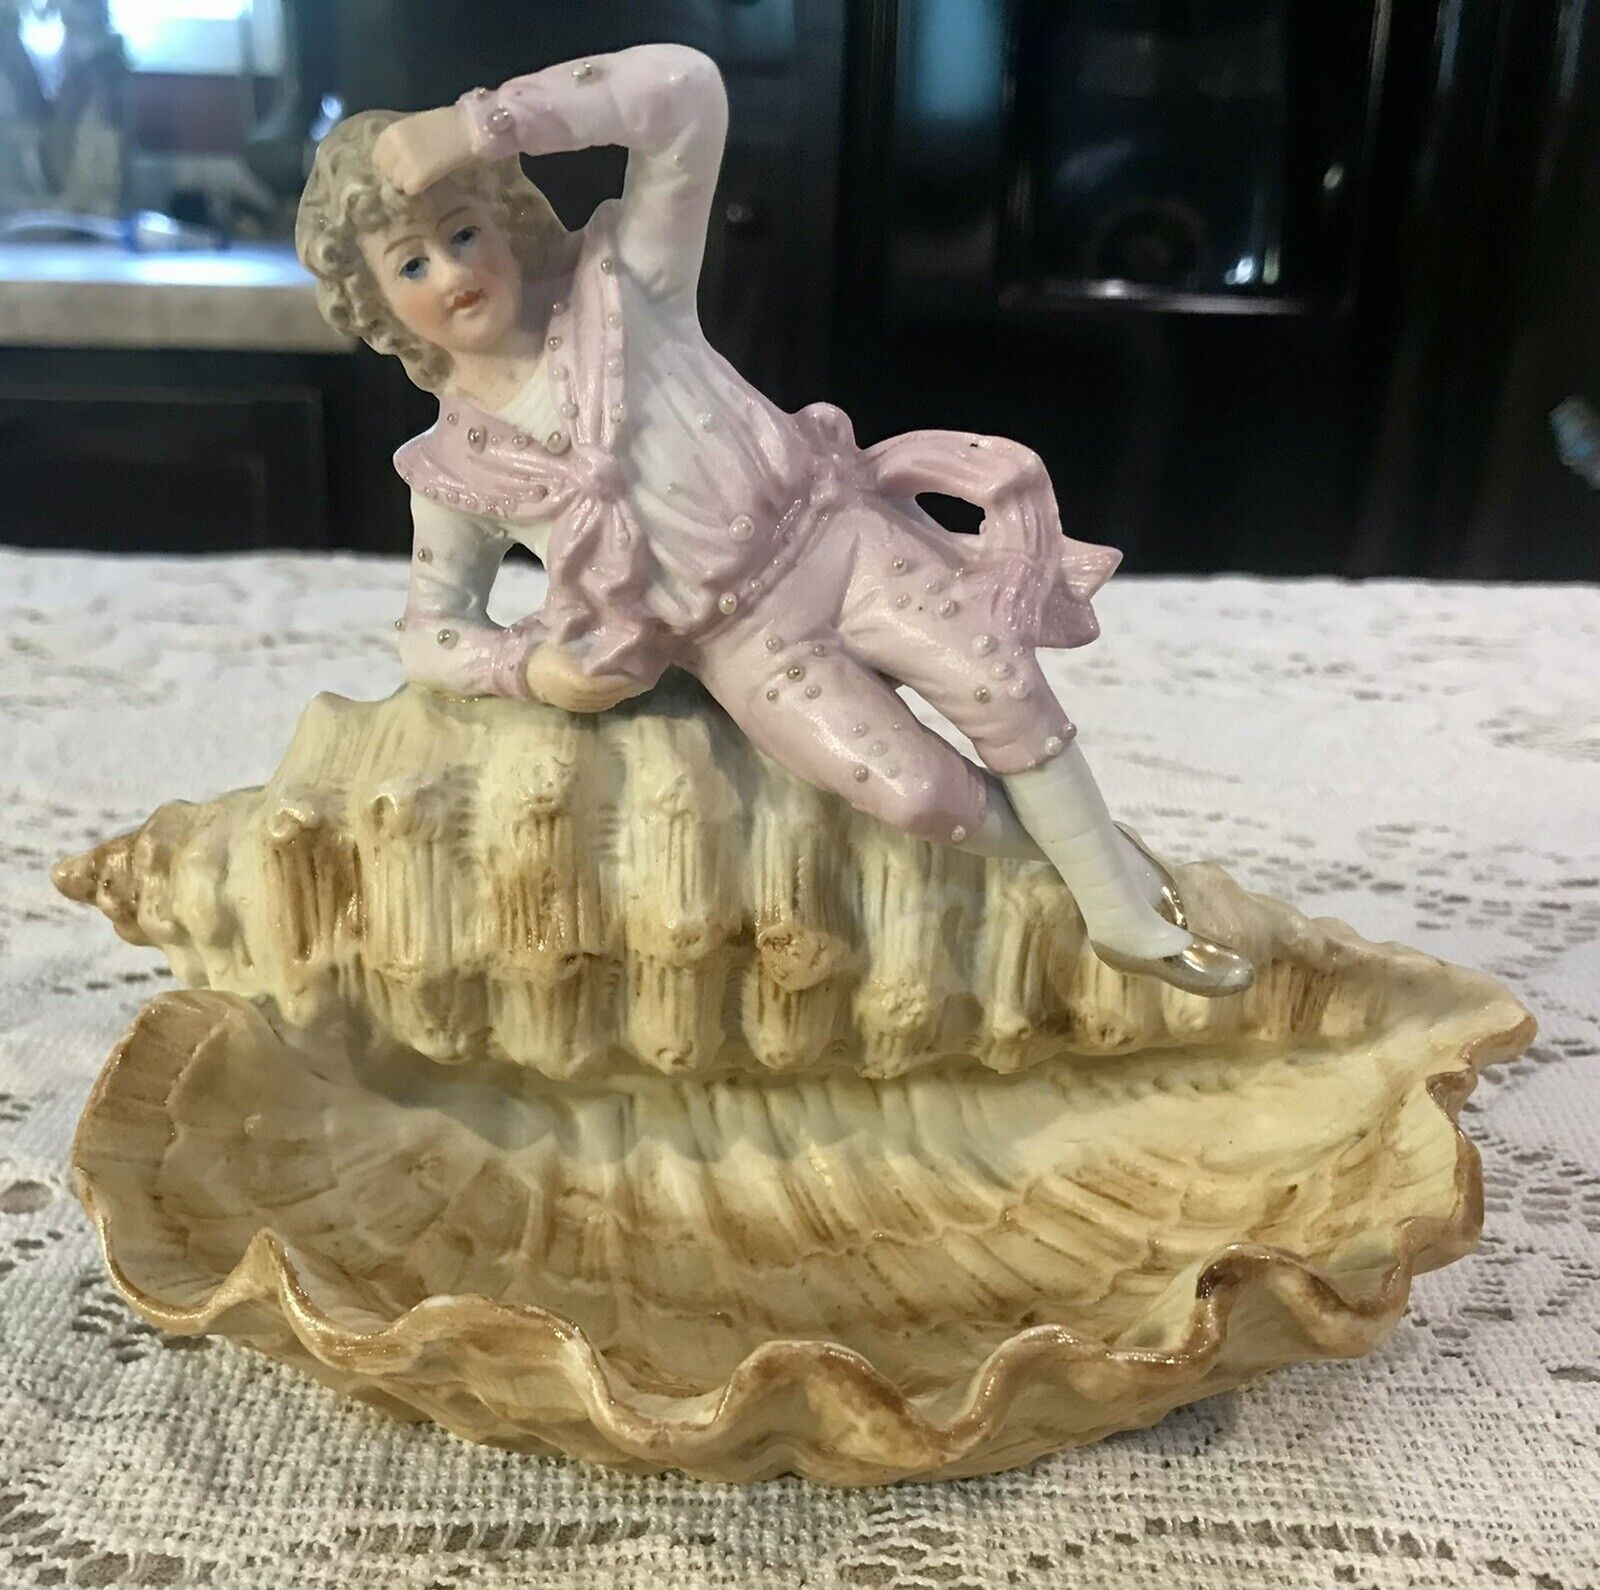 Adorable Antique German? Bisque Figurine/ Seashell Candy Dish